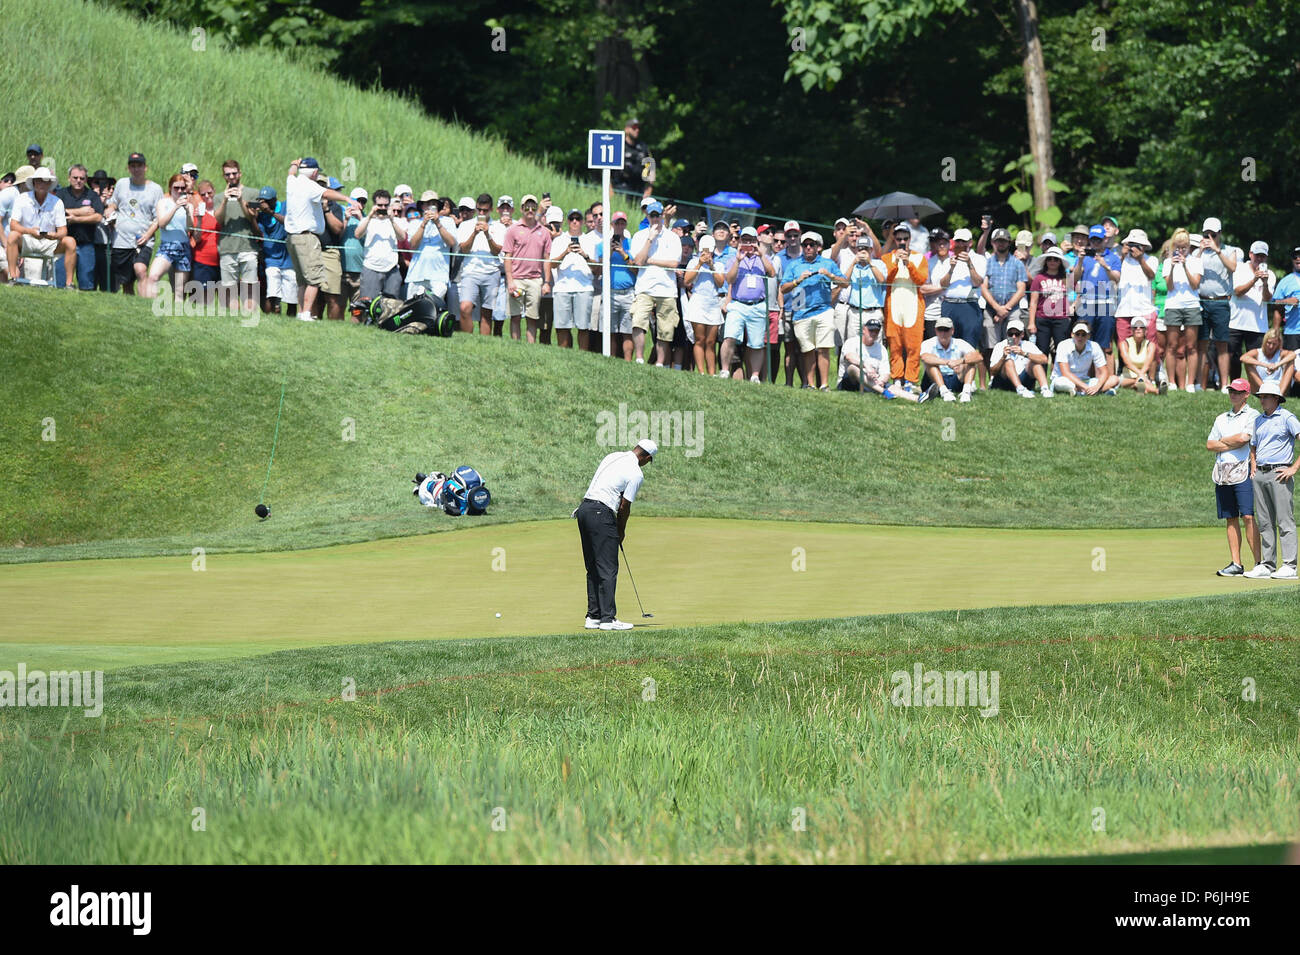 JUNE 30, 2018 - Tiger Woods (USA) putts on the eleventh green during the third round at the 2018 Quicken Loans National at the Tournament Players Club in Potomac MD. Stock Photo